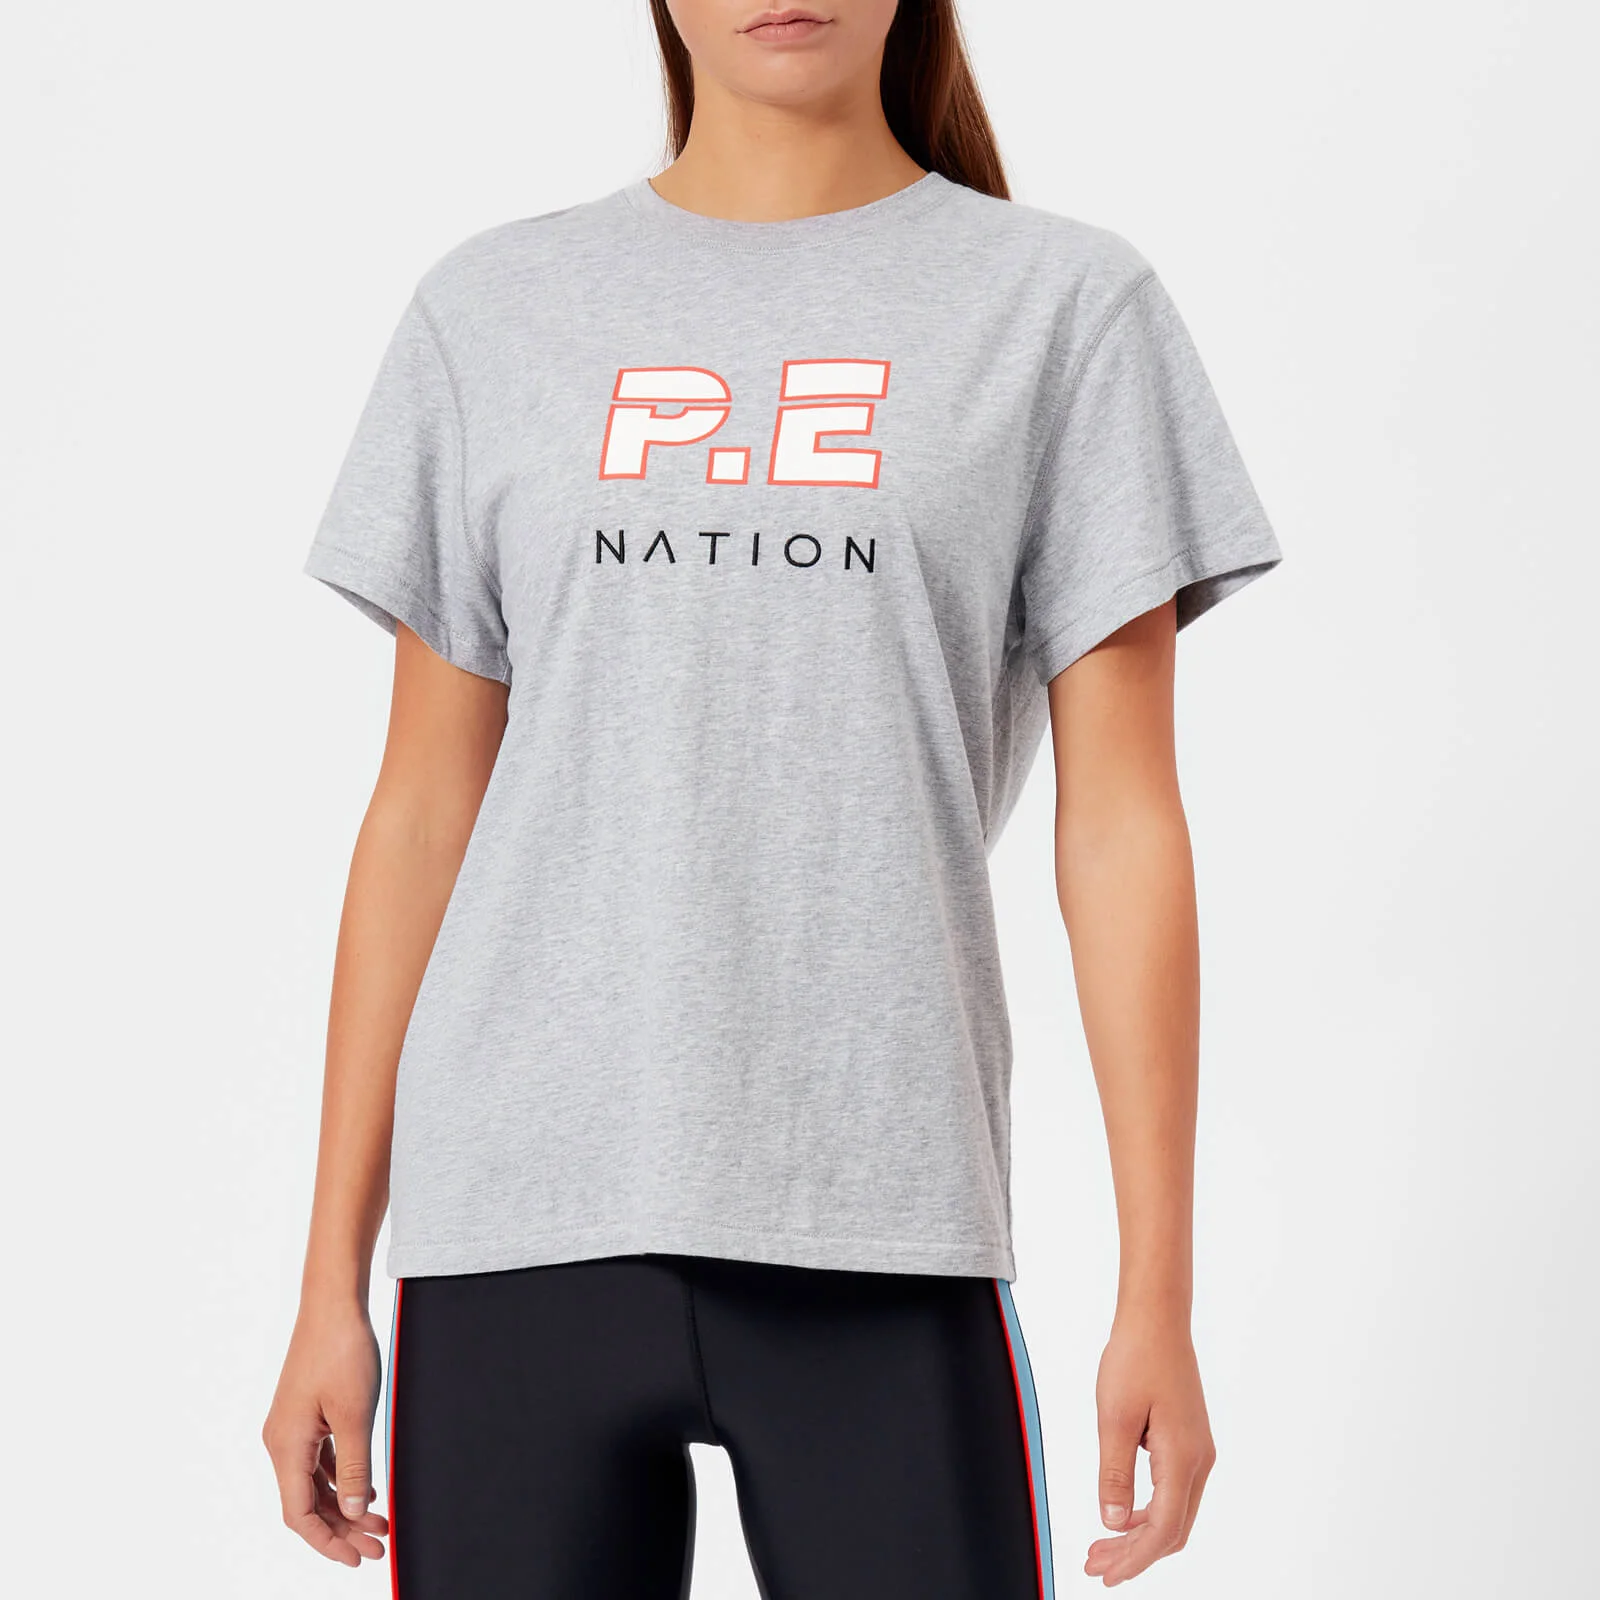 P.E Nation Women's The Double Track T-Shirt - Grey Marl Image 1